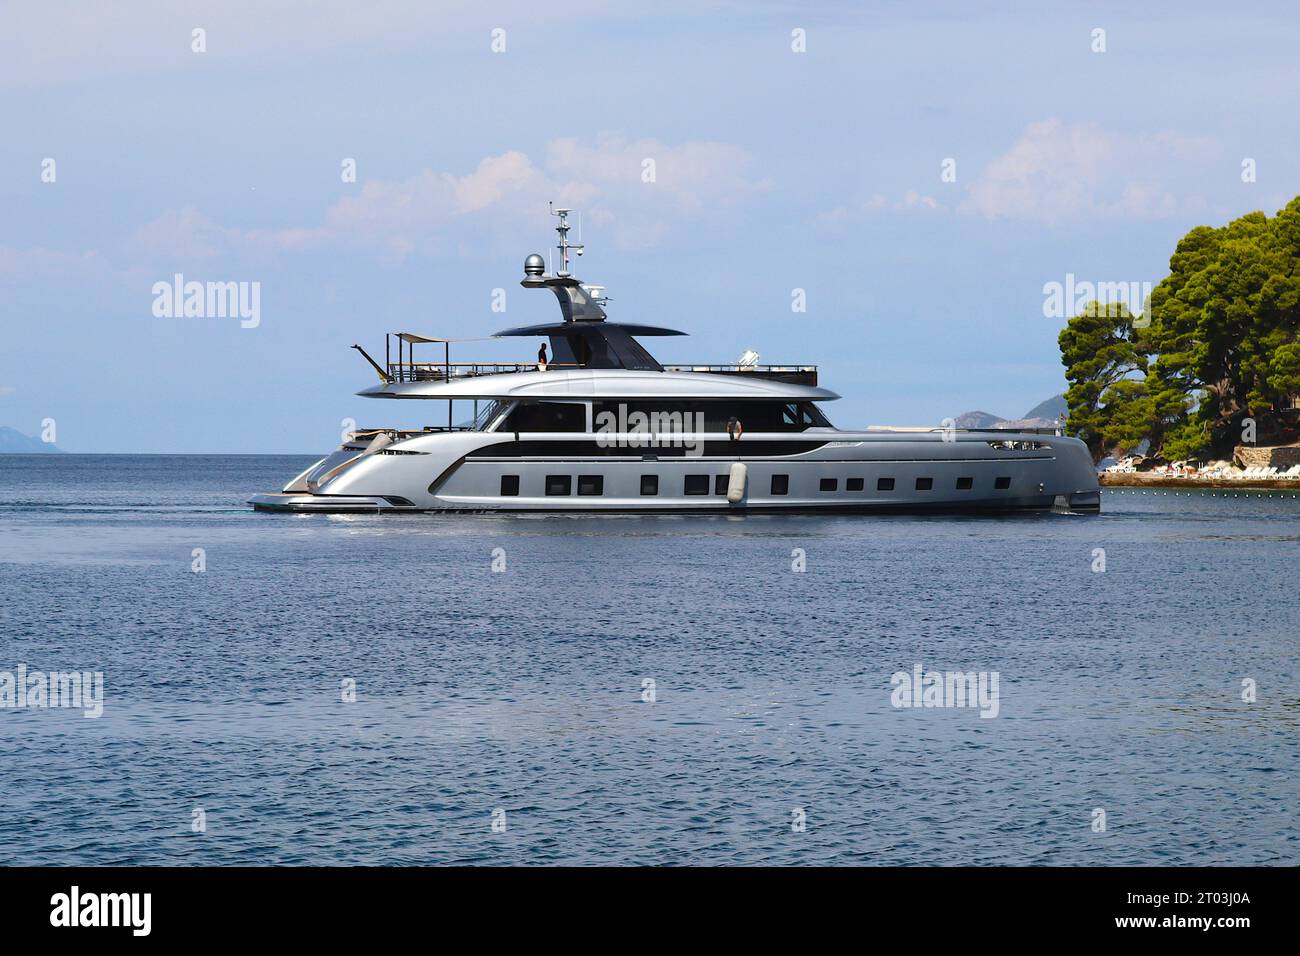 “Jaaber” costing €10.5 - €14 million, is the first of only 7 high end luxury Dynamiq GTT 115 hybrid Superyachts designed by Porsche, departing Cavtat. Stock Photo